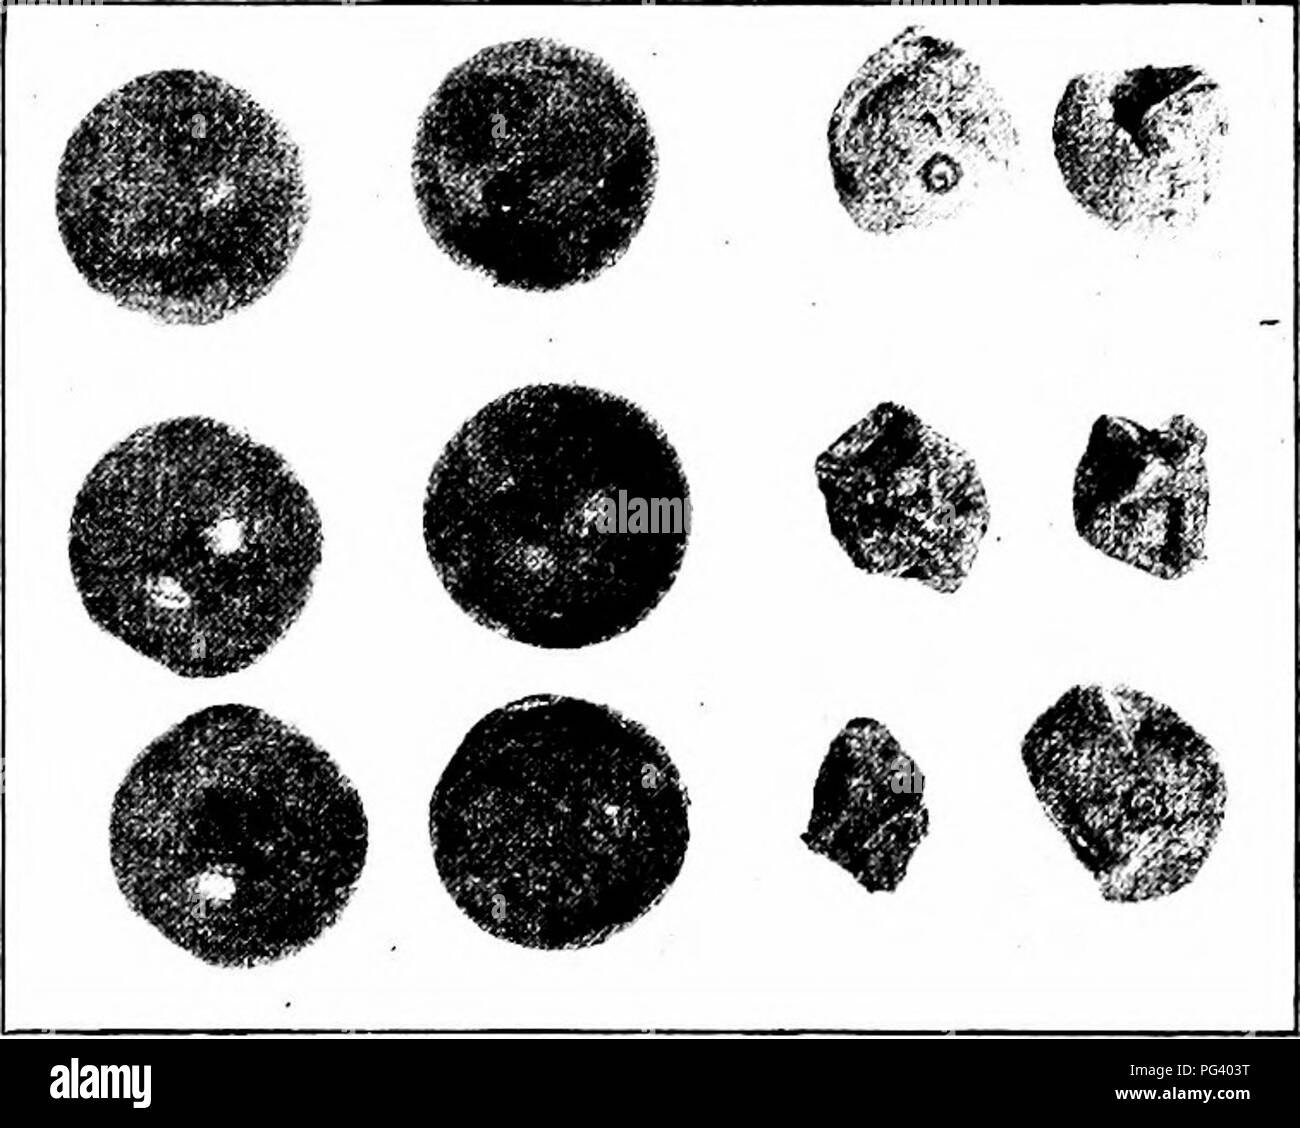 . Manual of fruit diseases . Fruit. GRAPE DISEASES 257 (Fig. 69) very similar to that in the case of the black-rot disease. They shrivel to a mummy as in black-rot, but have a slightly more grayish aspect and the pustules are less numerous and more scattered in dead-arm than in black-rot. Cause of dead-arm. It has been experimentalh- demonstrated that the fungus Cryptosporella Viticola causes dead-arm. From vines which were diseased the previous year pycnospores ooze forth, during wet weather, about the time the buds burst in the spring. These spores are spat- tered promiscu- ously, some of th Stock Photo